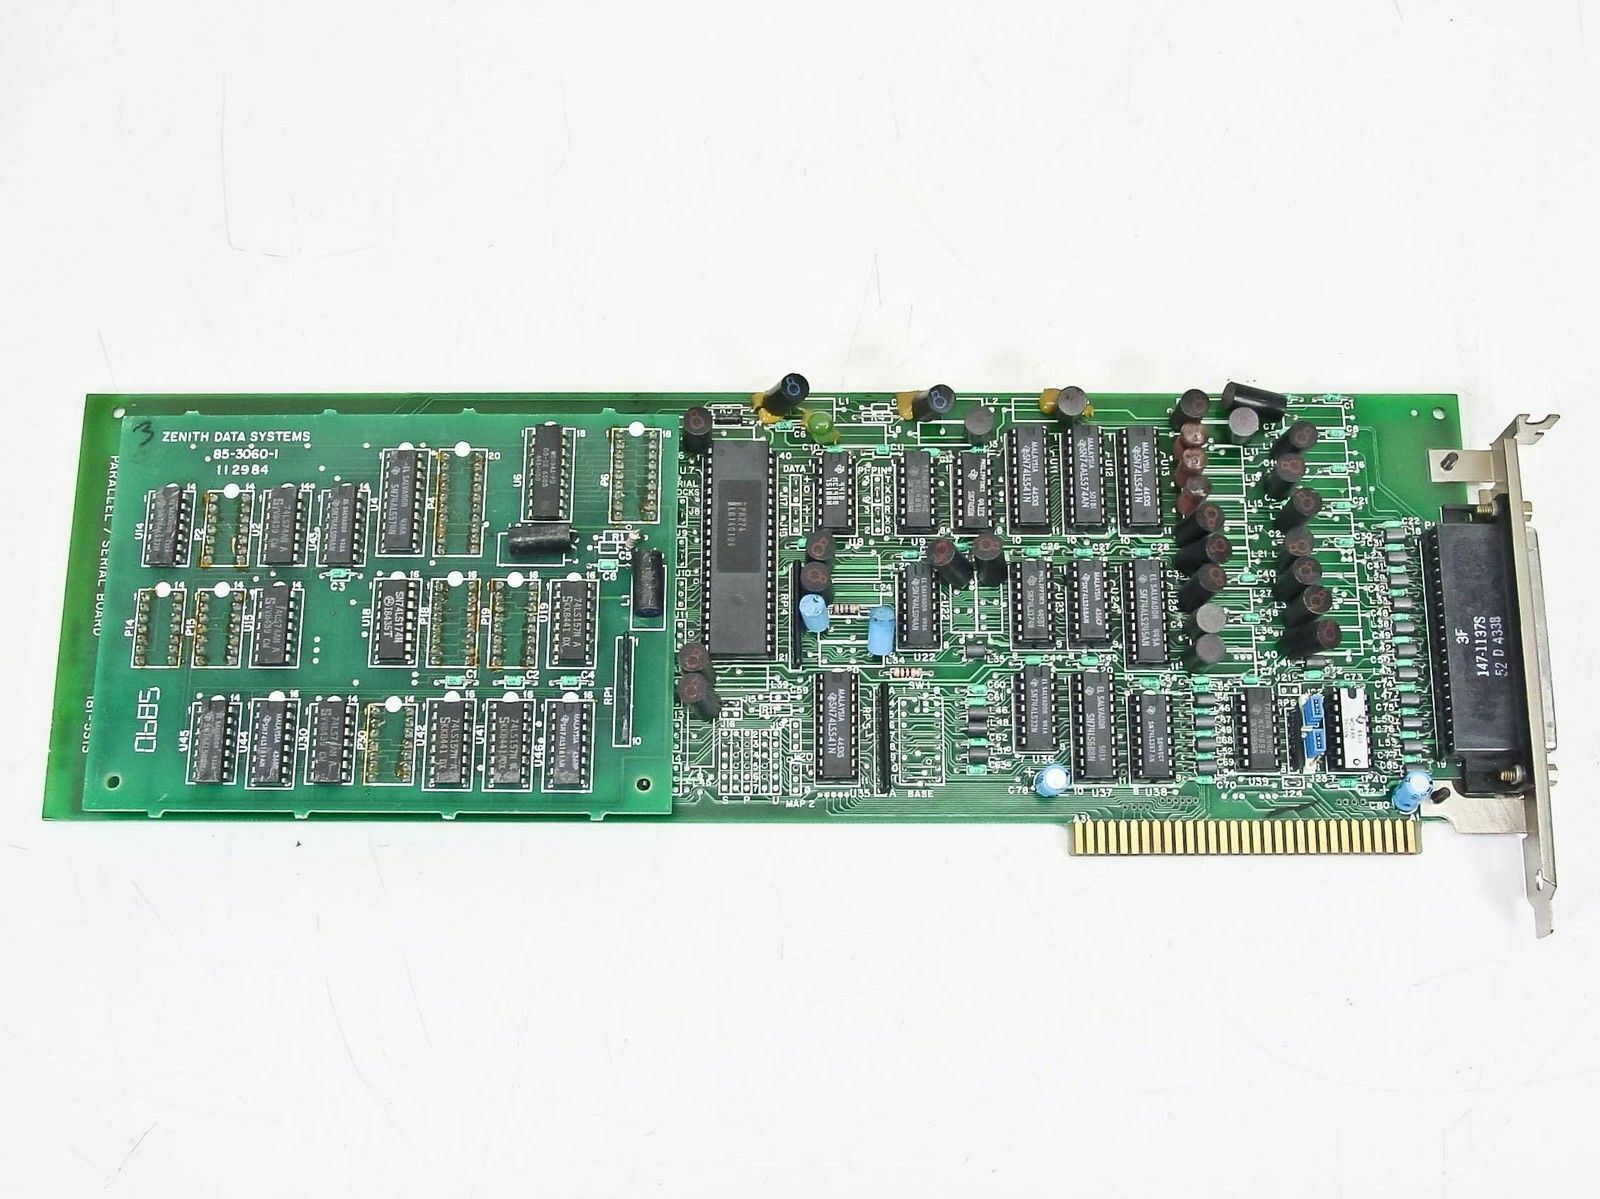 Zenith 85-3014-1 8-Bit ISA Parallel and Serial Board - Vintage 1984